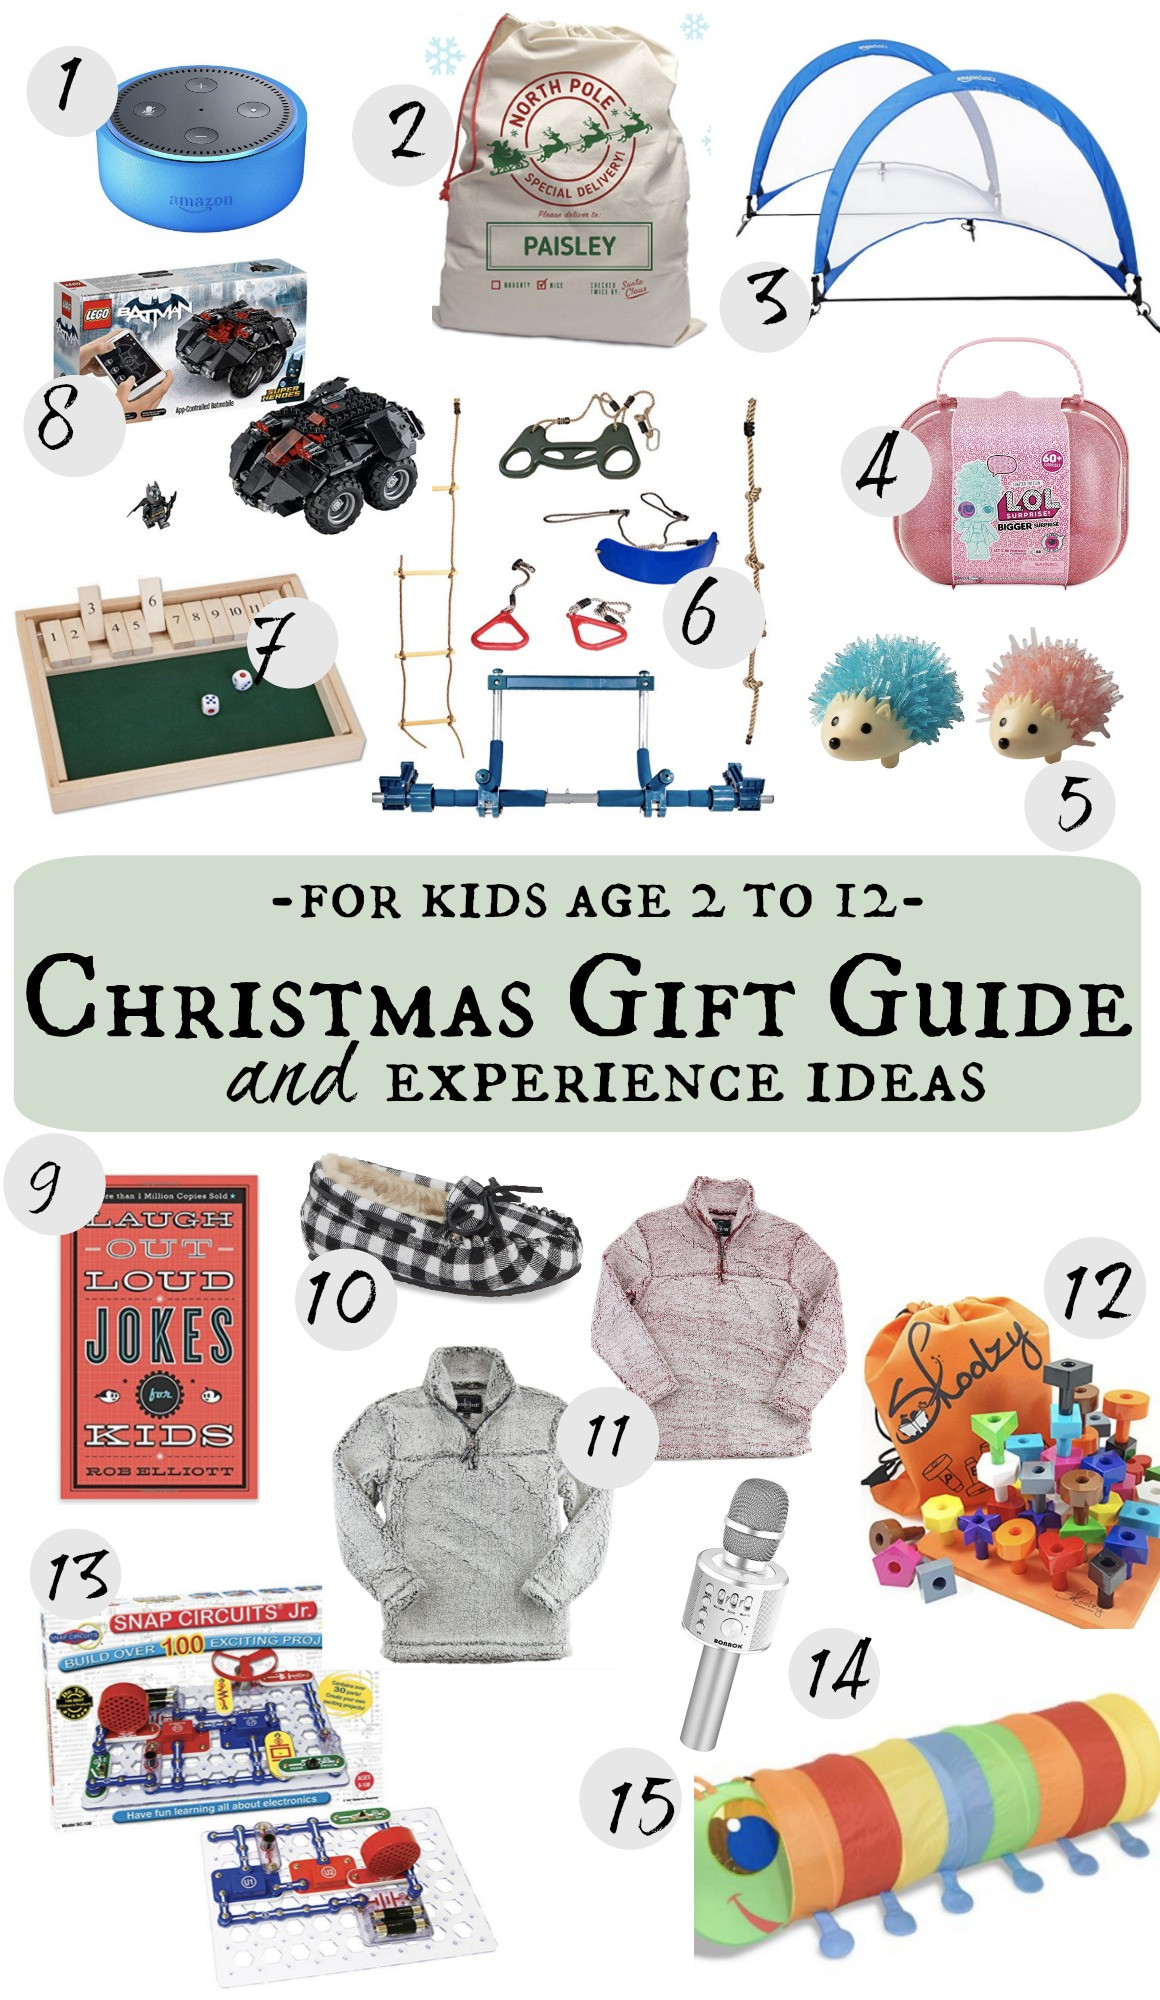 Gift Guides For Kids
 Christmas Gift Guide for Kids with Experience Ideas too